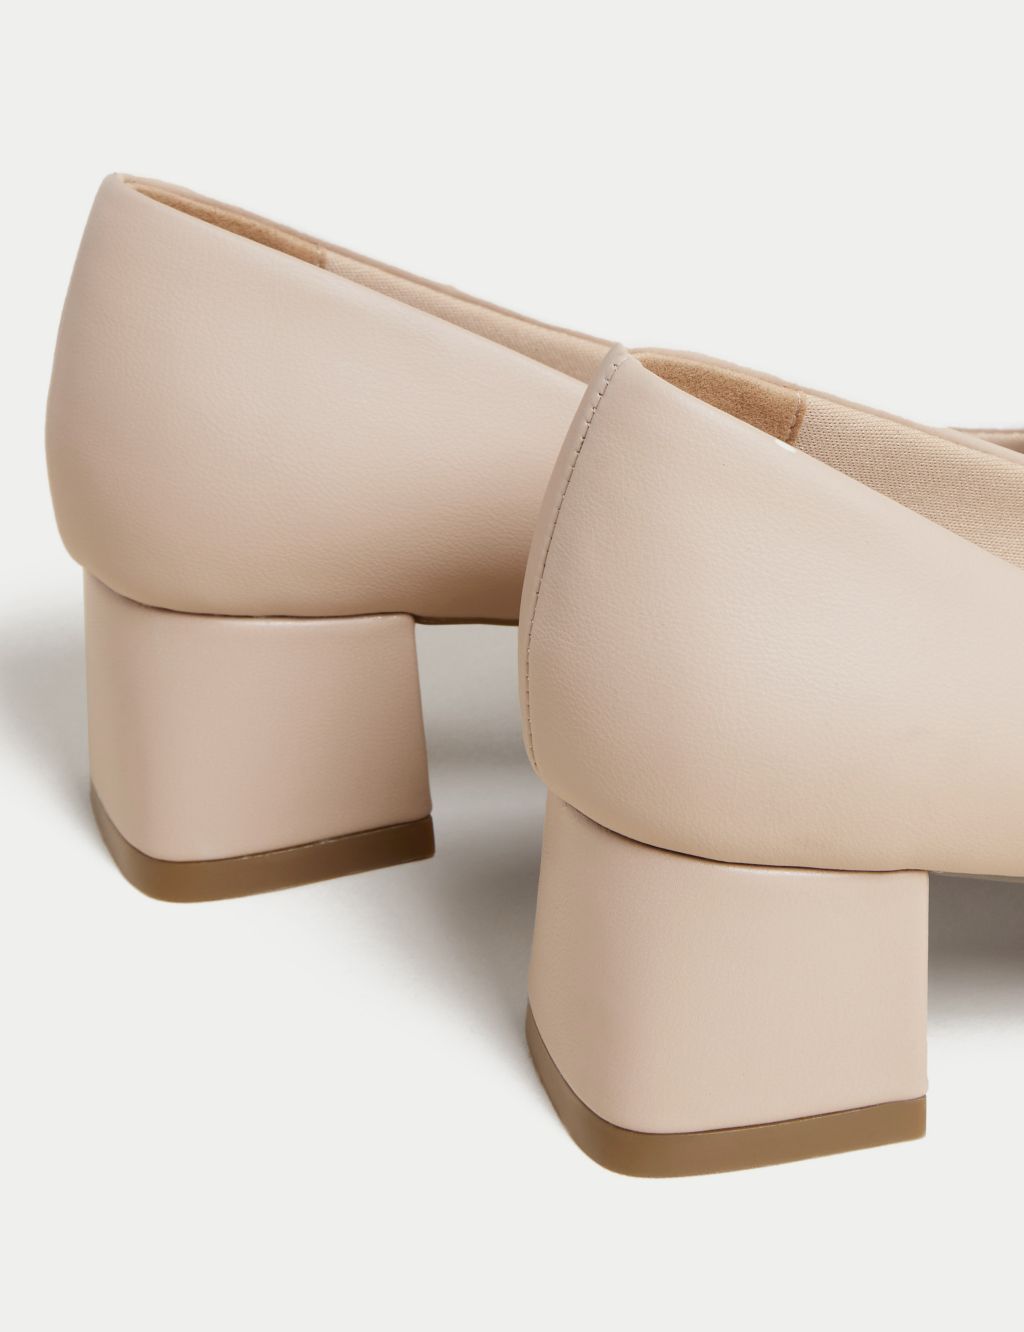 Wide Fit Block Heel Square Toe Shoes image 4